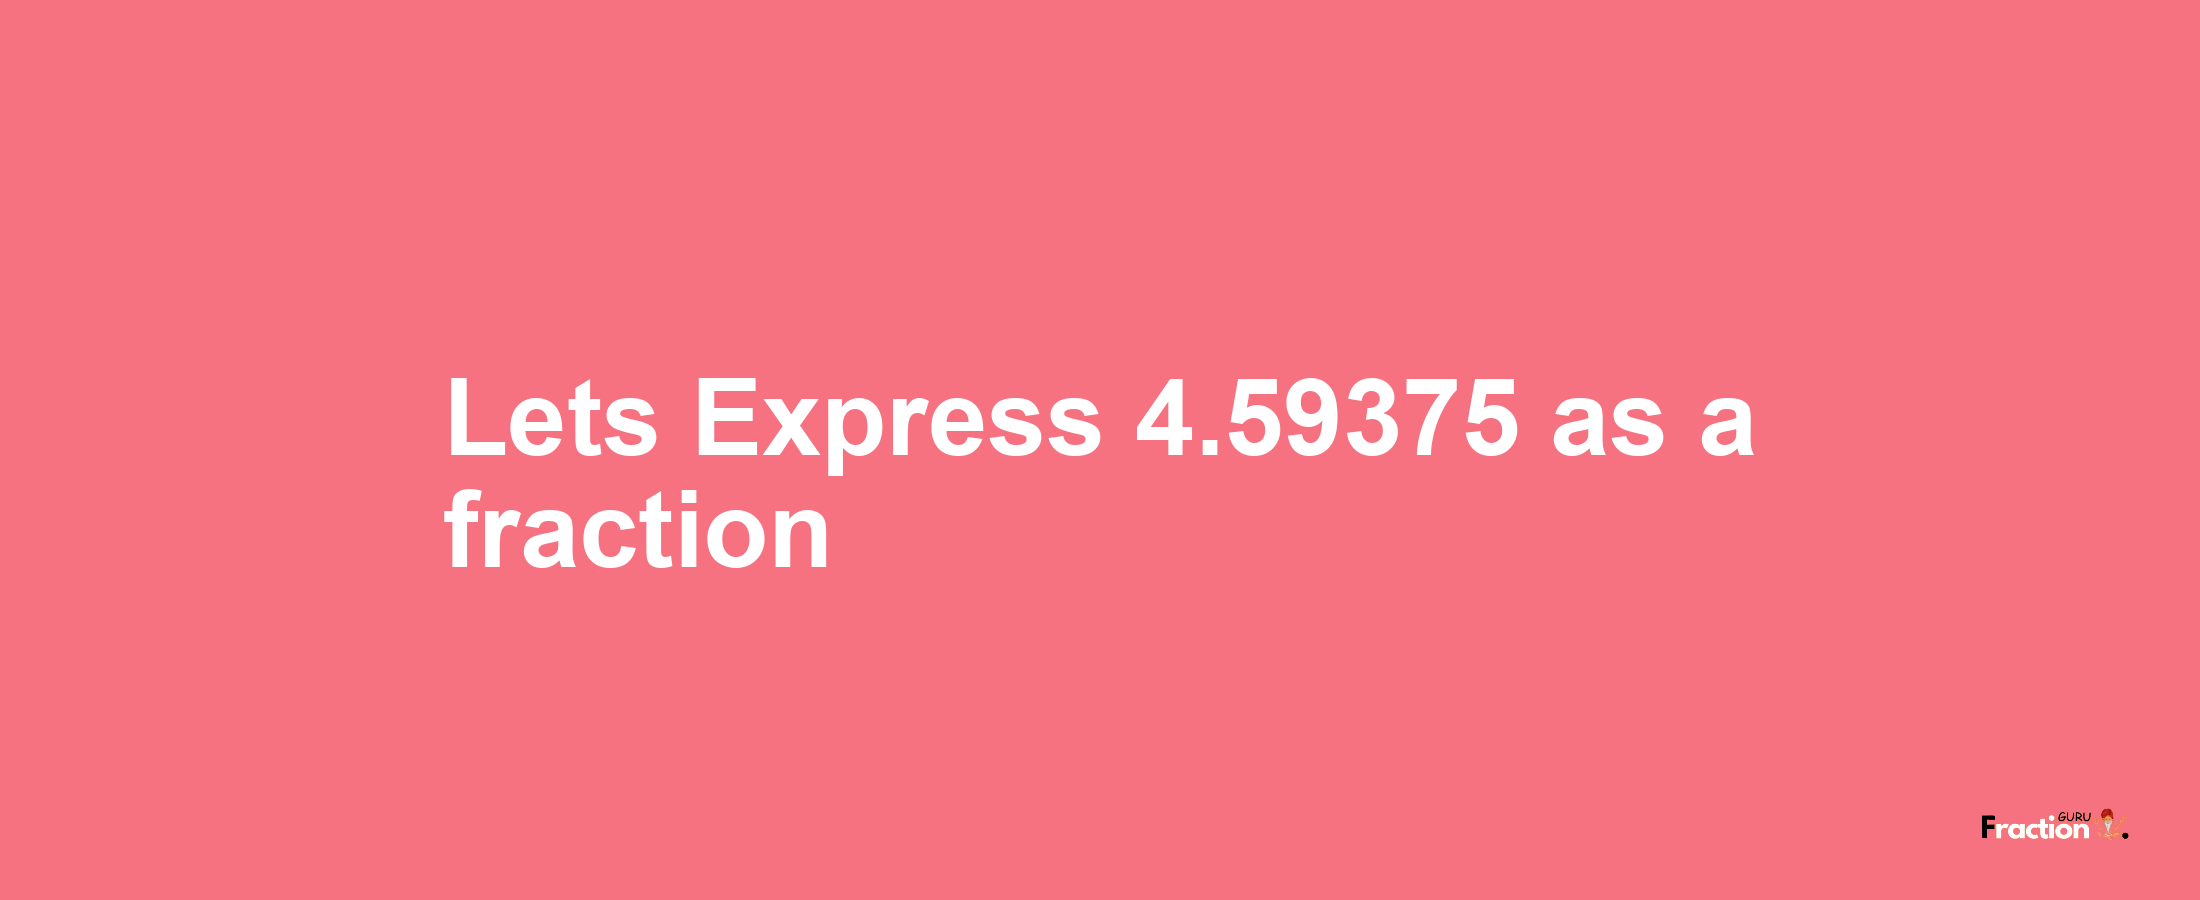 Lets Express 4.59375 as afraction